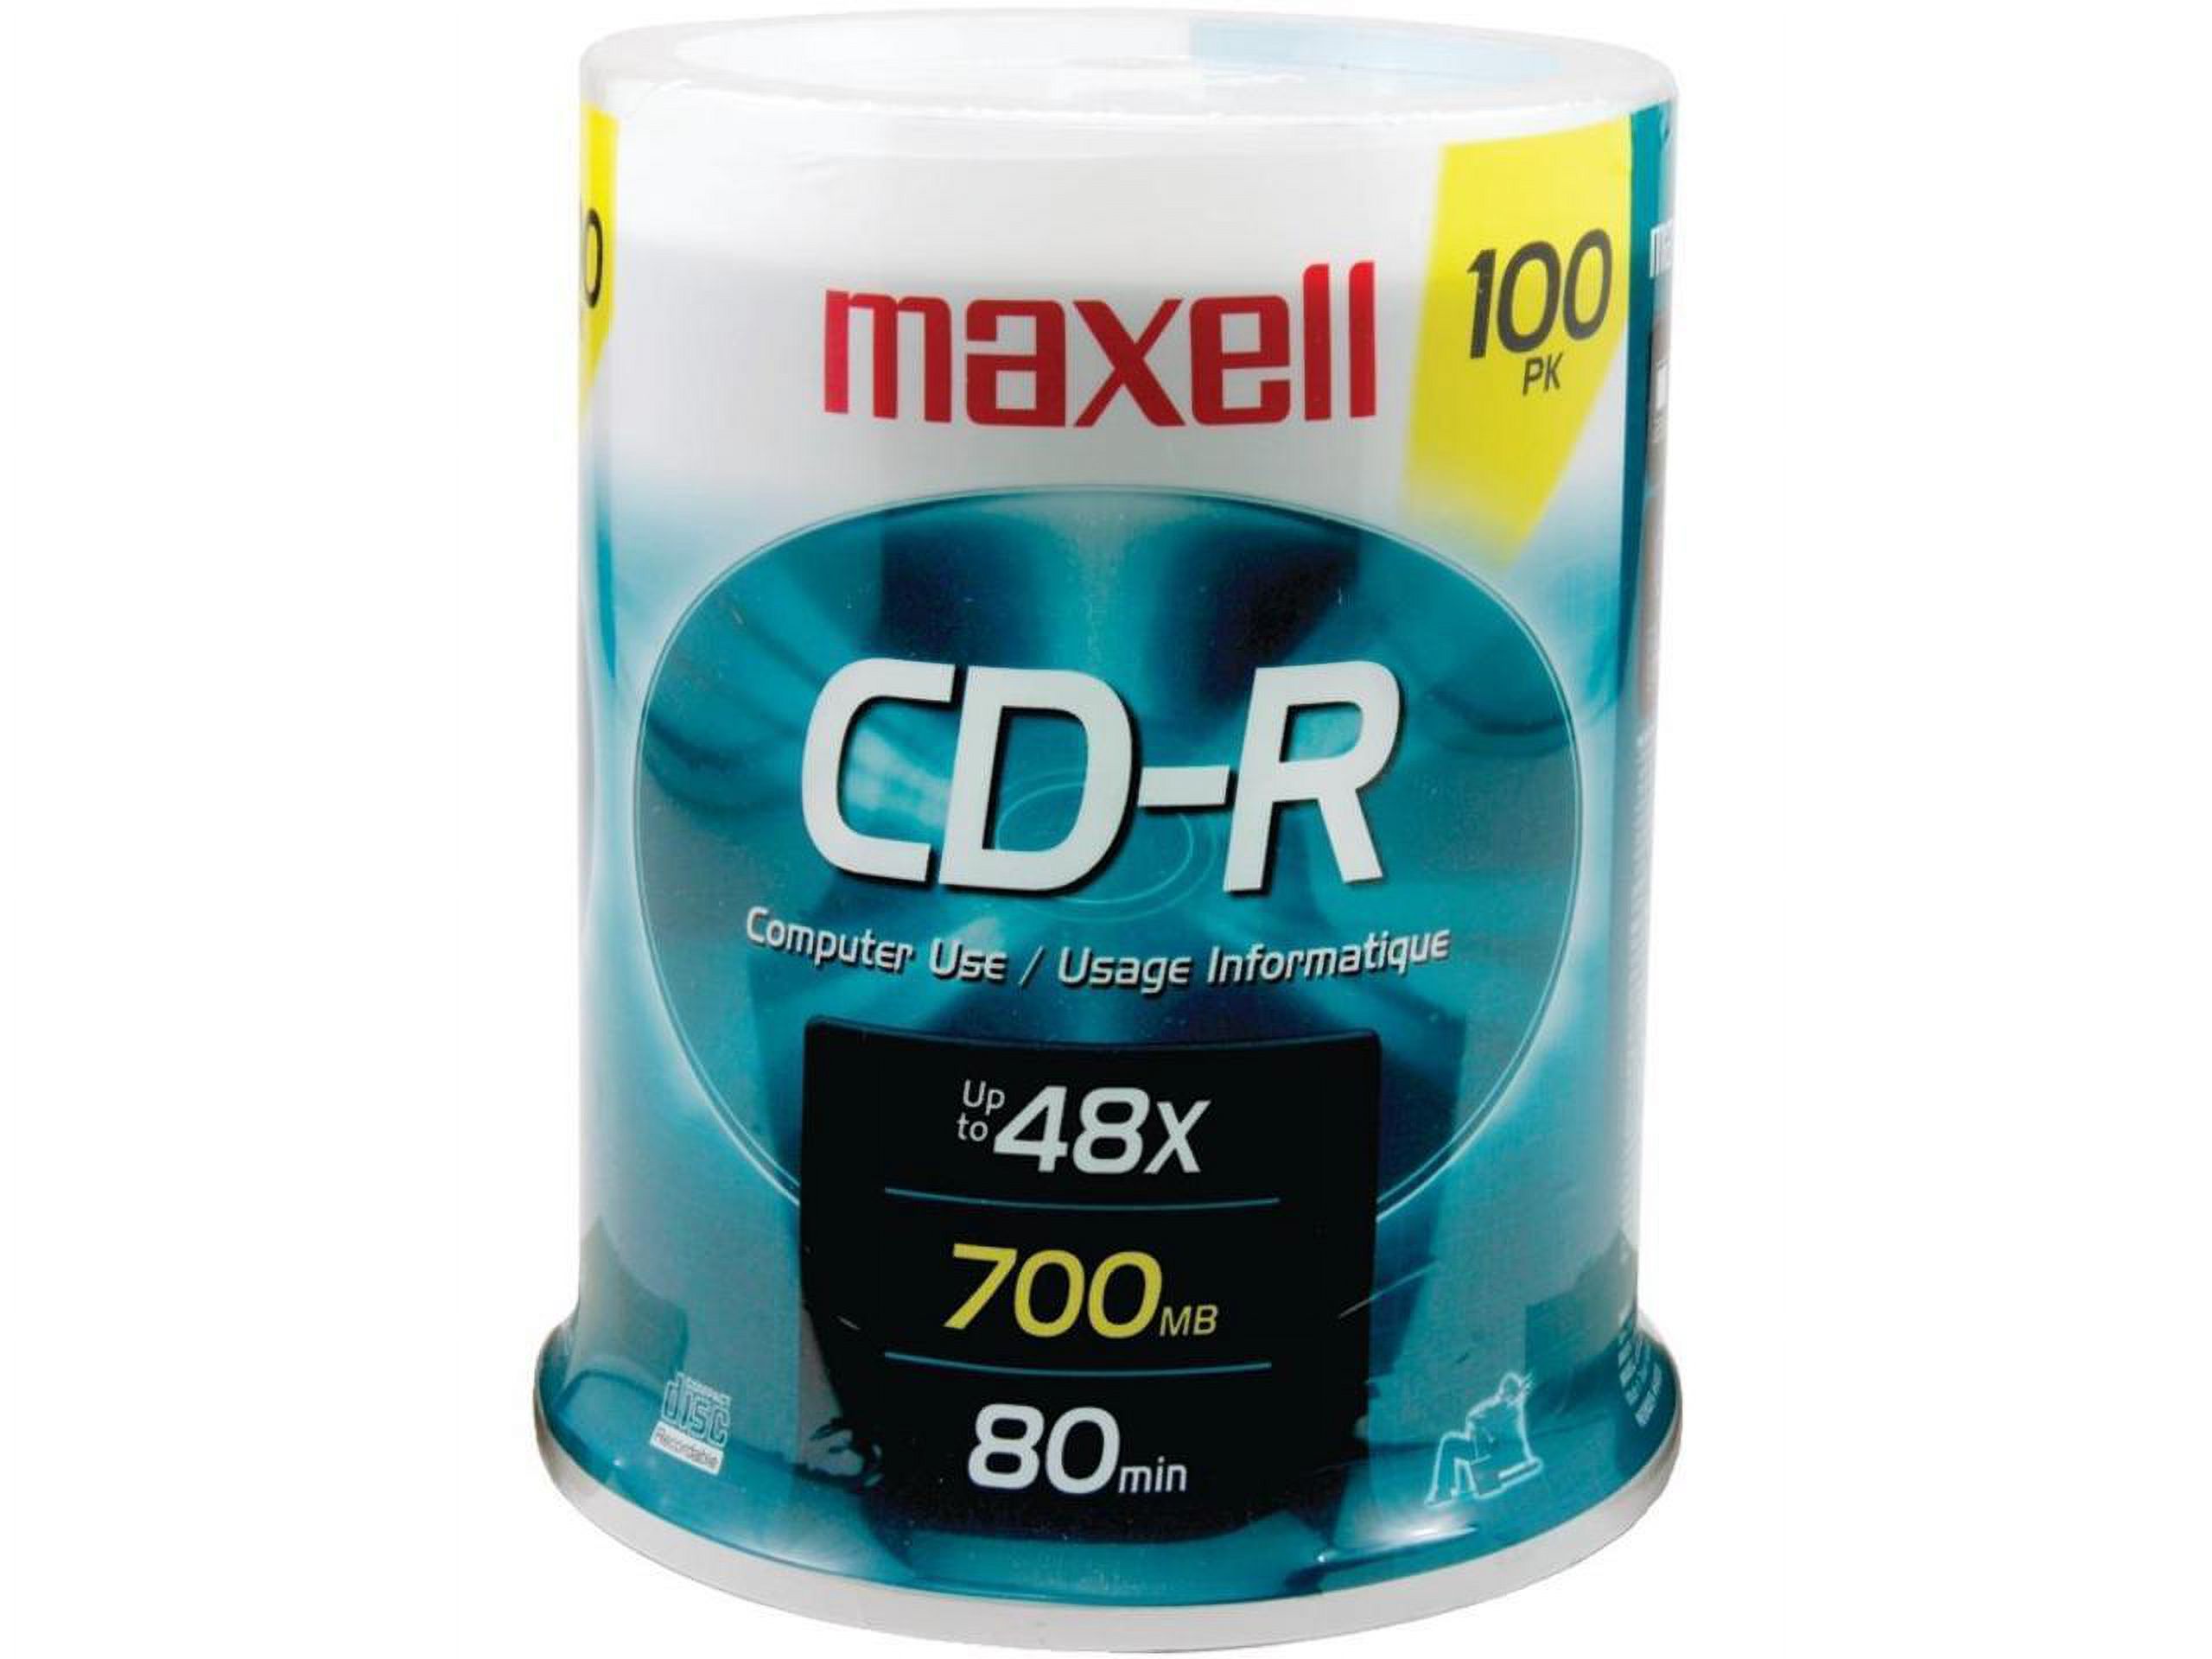 Maxell's CD-R 100PK Spindle 48x 700MB Recordable Blank Media - image 2 of 2